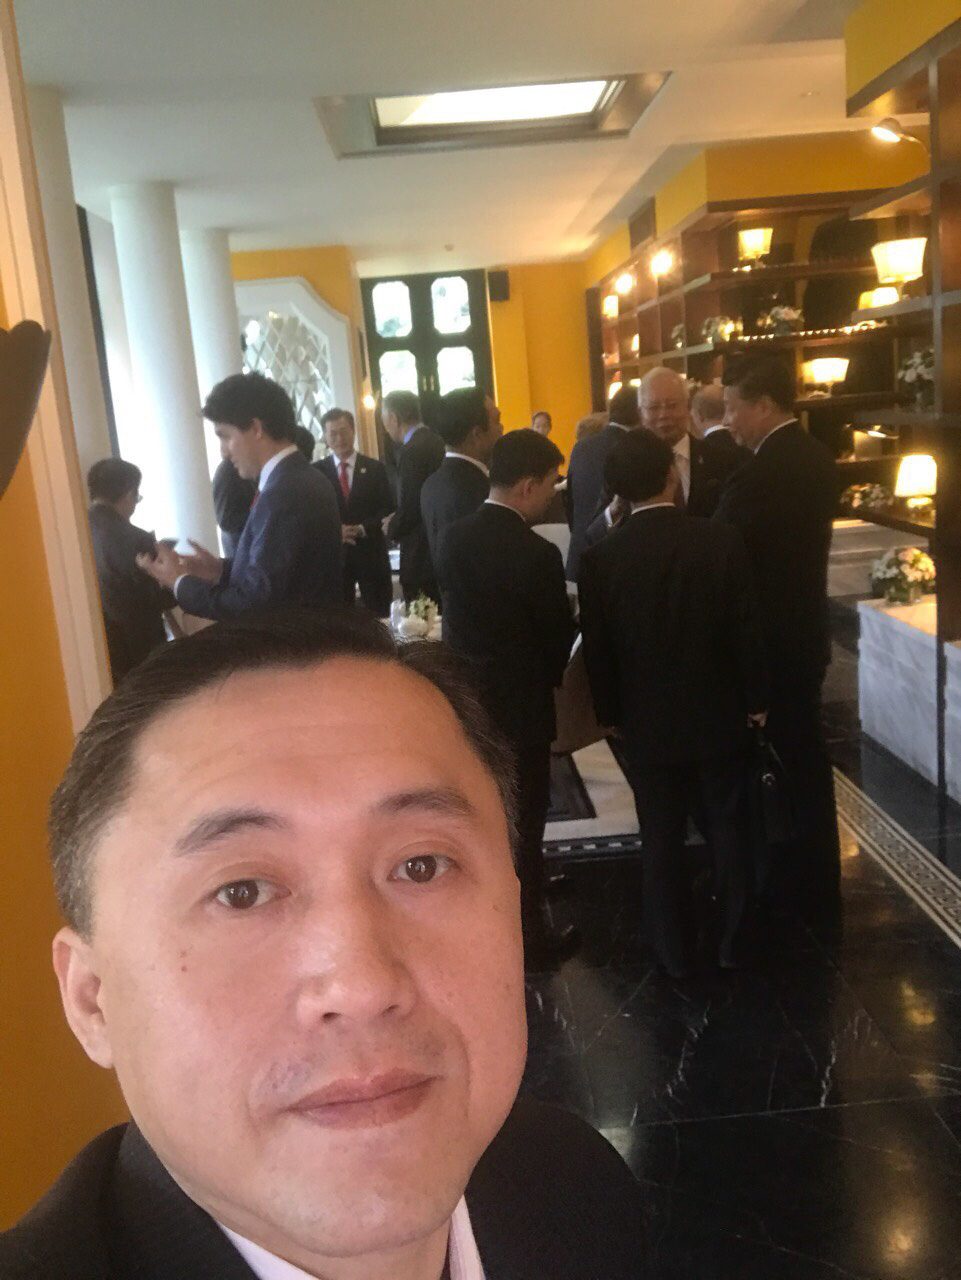 LUNCH WITH LEADERS. SAP Bong Go takes a selfie with Chinese President Xi Jinping, Canadian Prime Minister Justin Trudeau, and Malaysian Prime Minister Najib Razak behind him. 